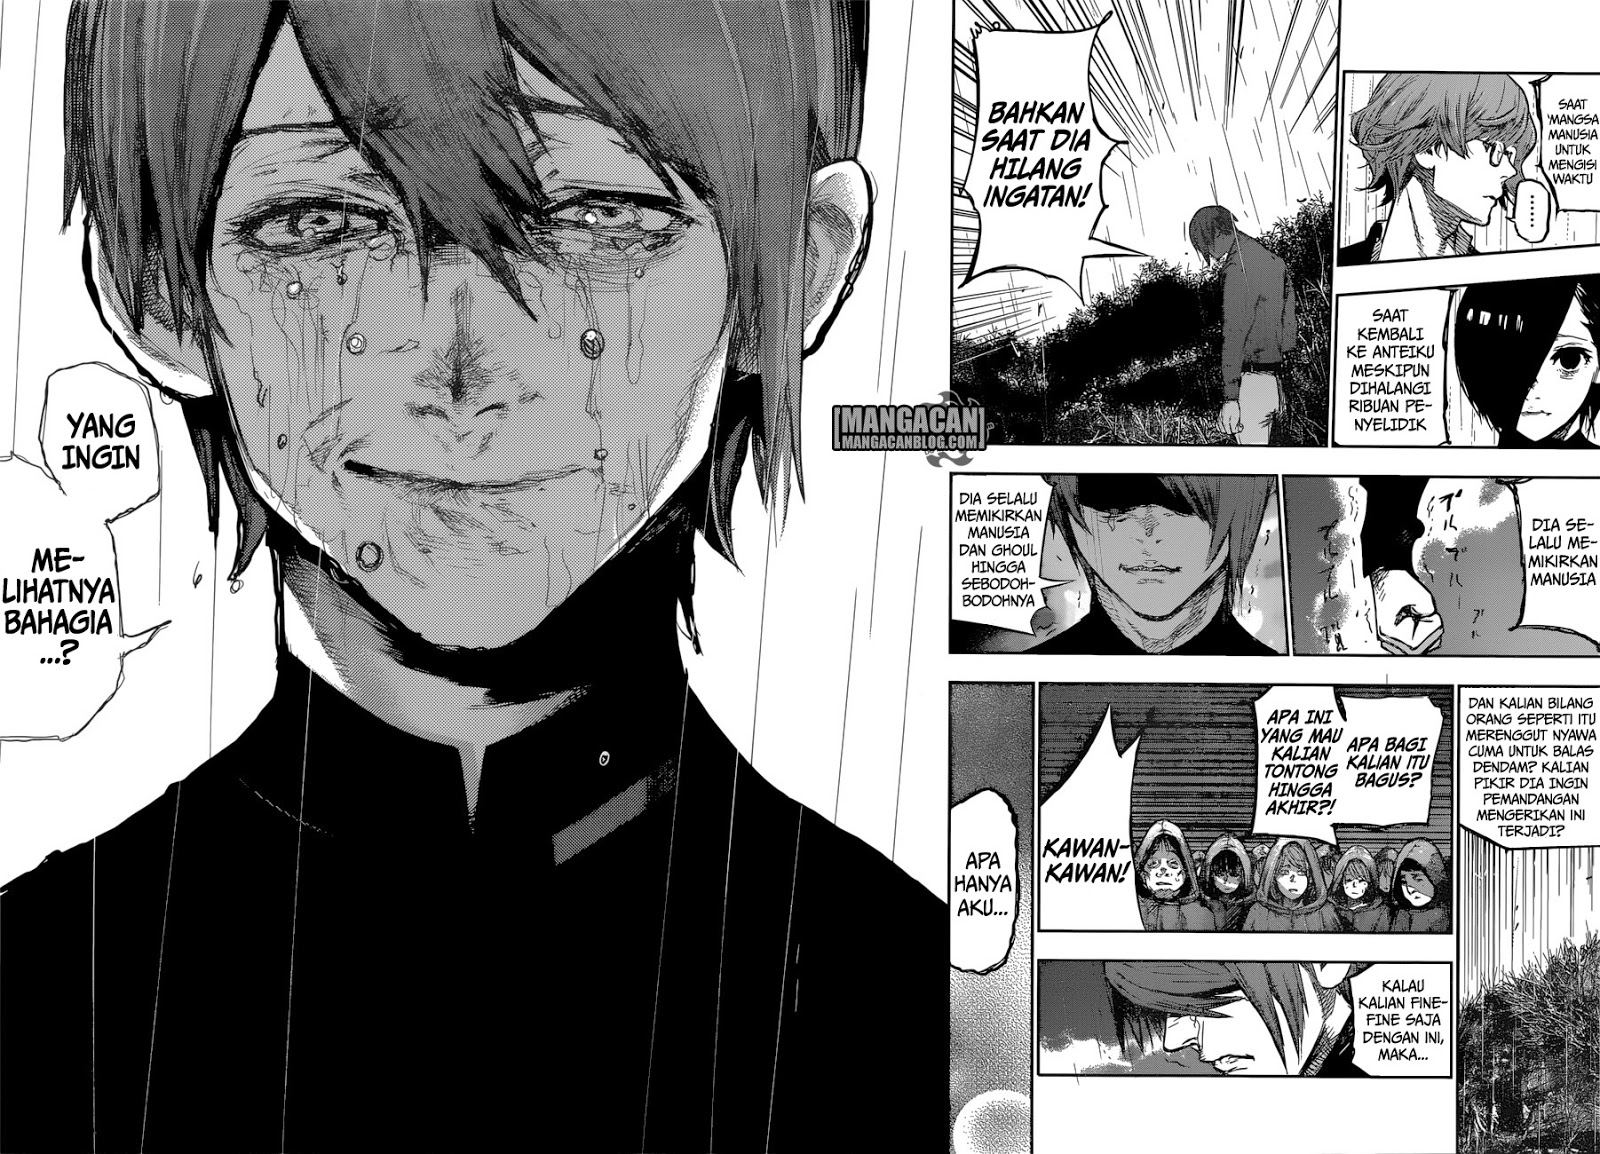 Tokyo Ghoul:re Chapter 149